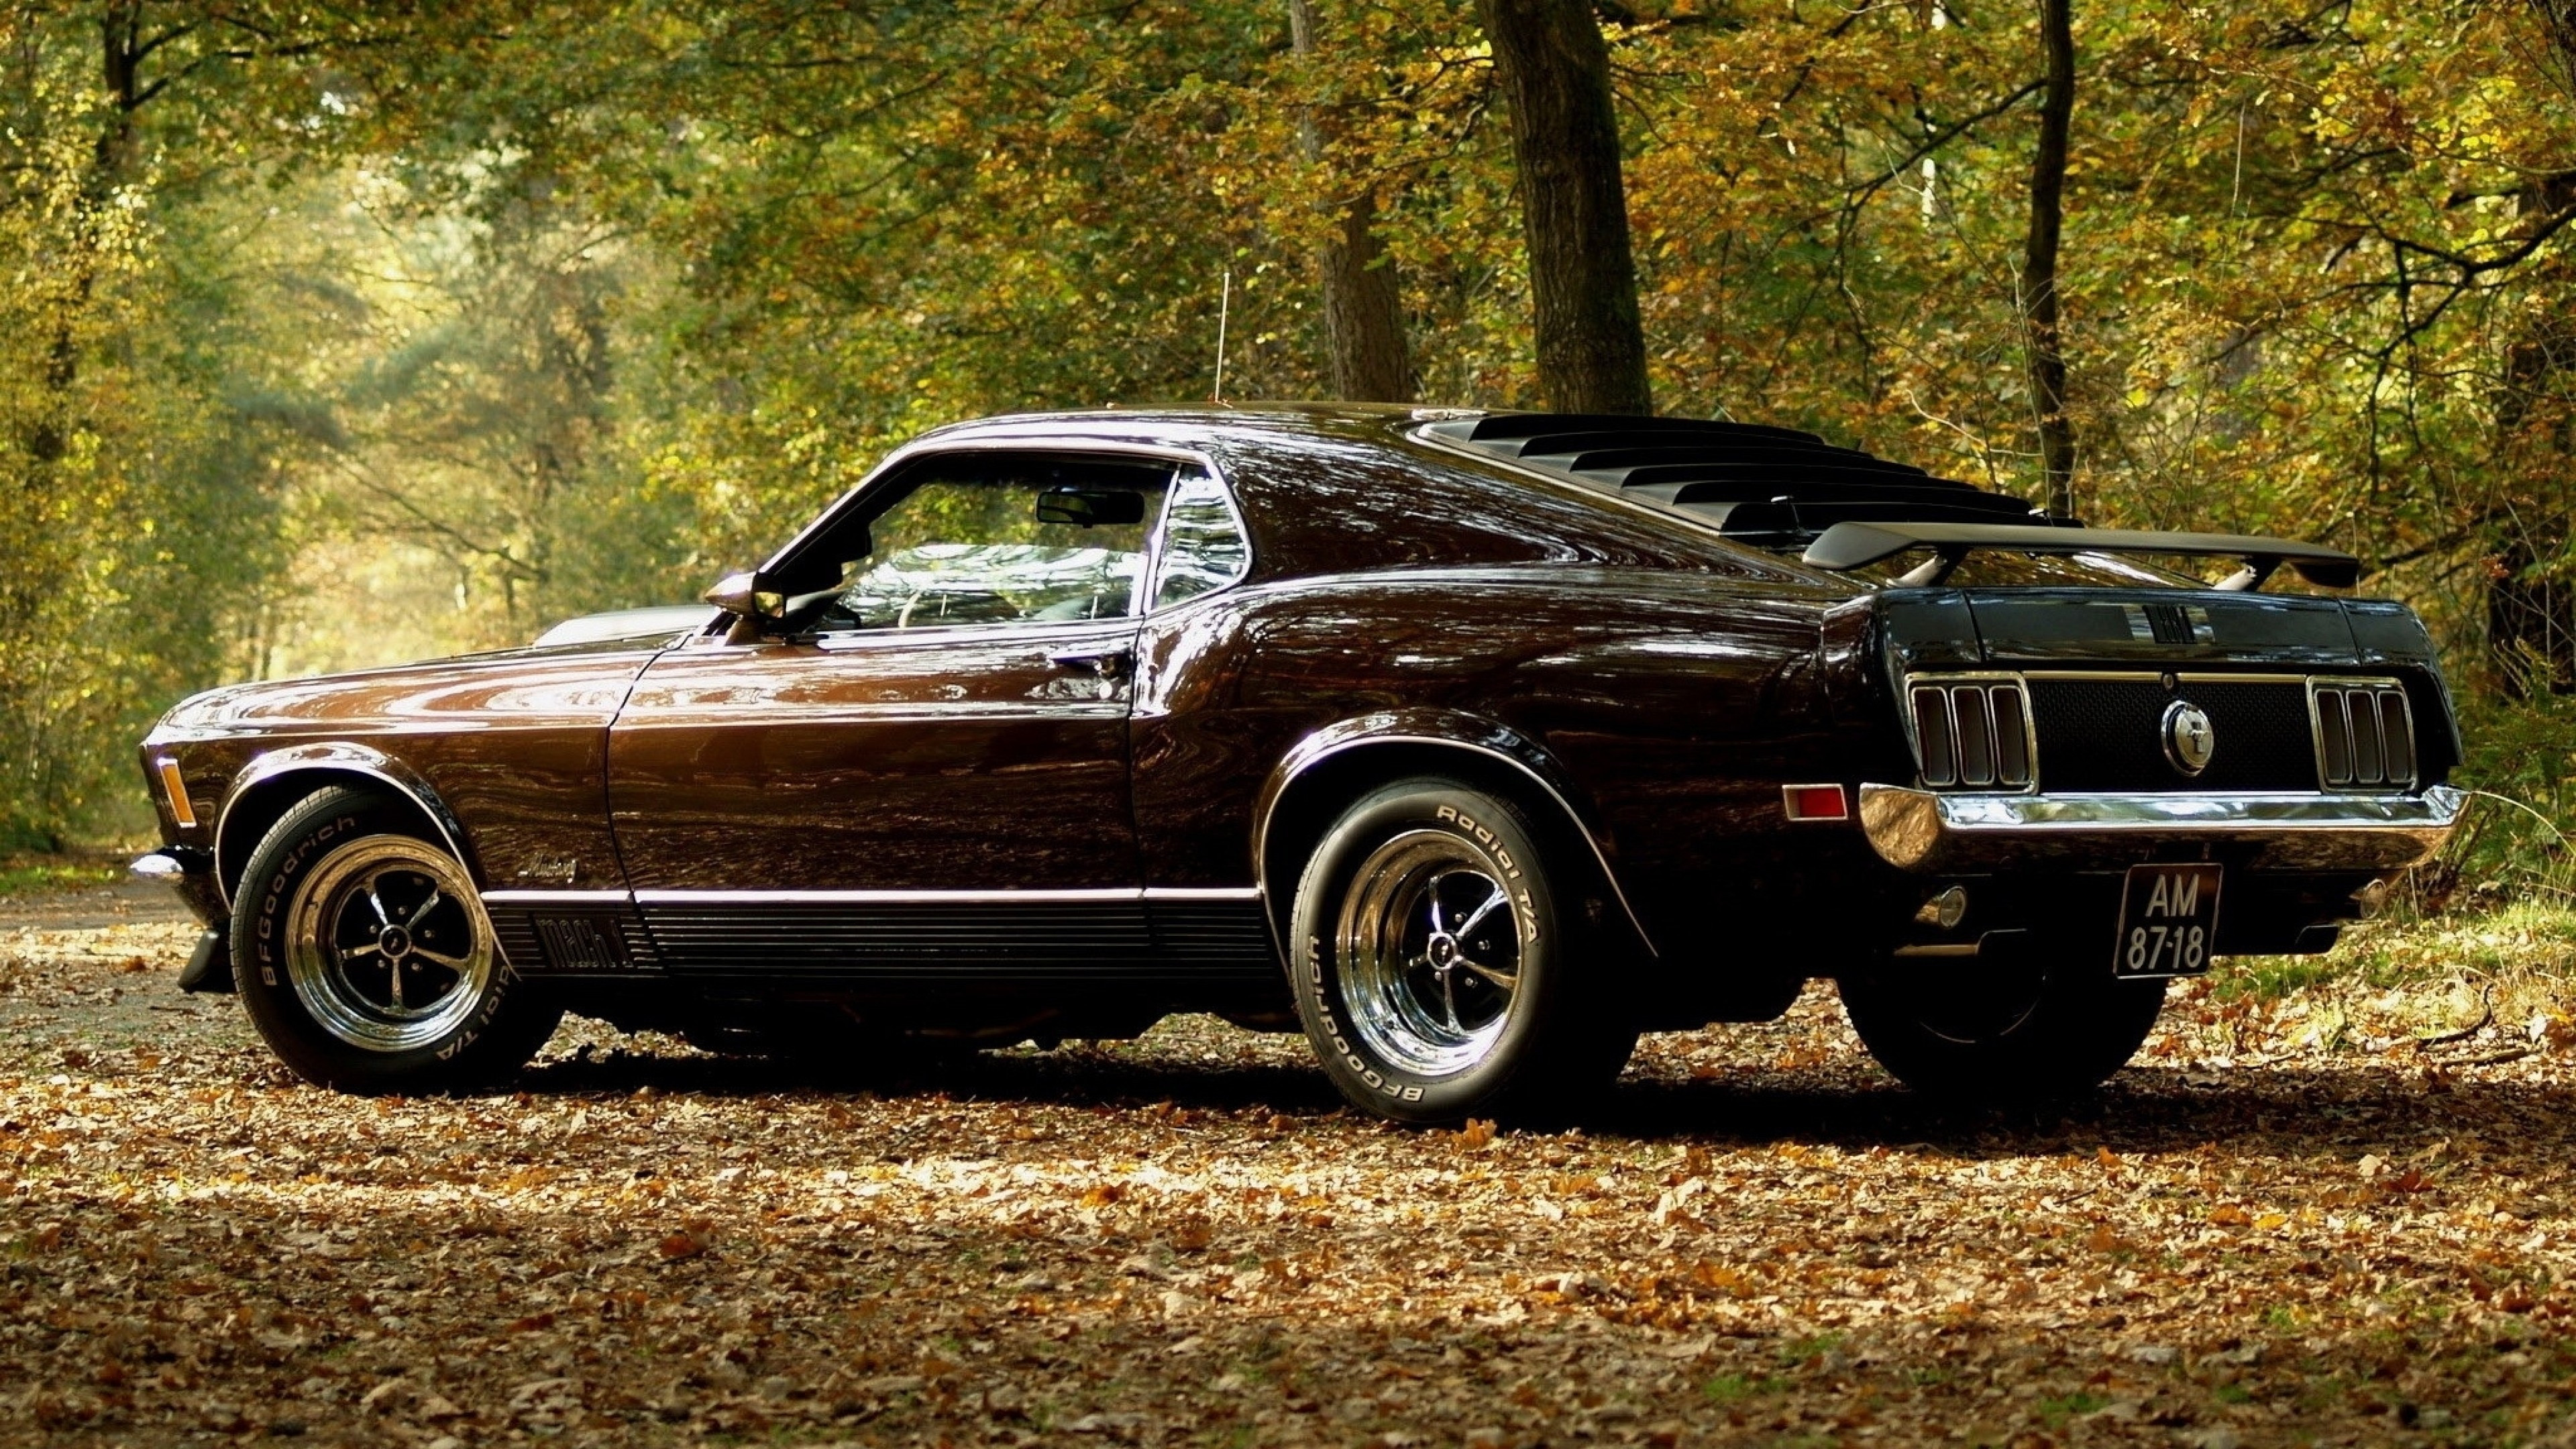 Ford Mustang: Classic cars, American automobiles. 3840x2160 4K Background.